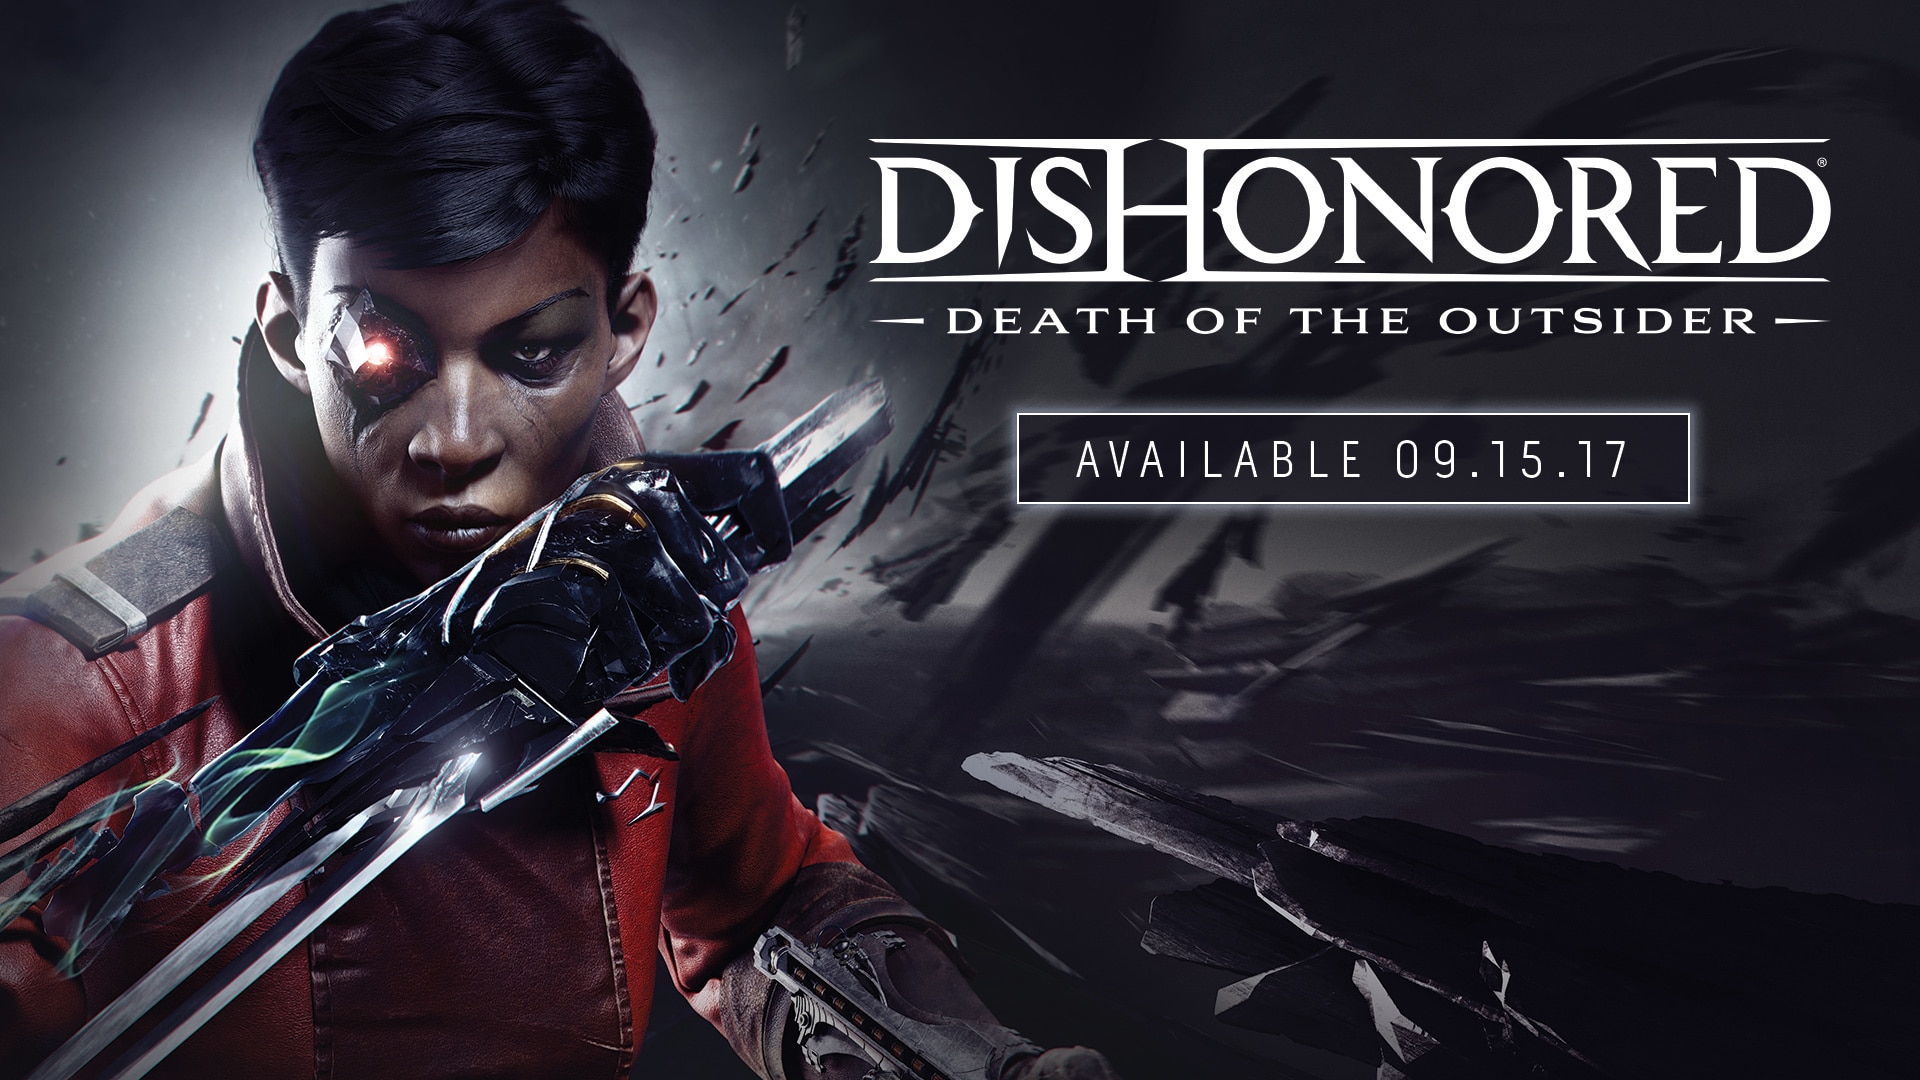 Dishonored Death of the Outsider-GamersRD